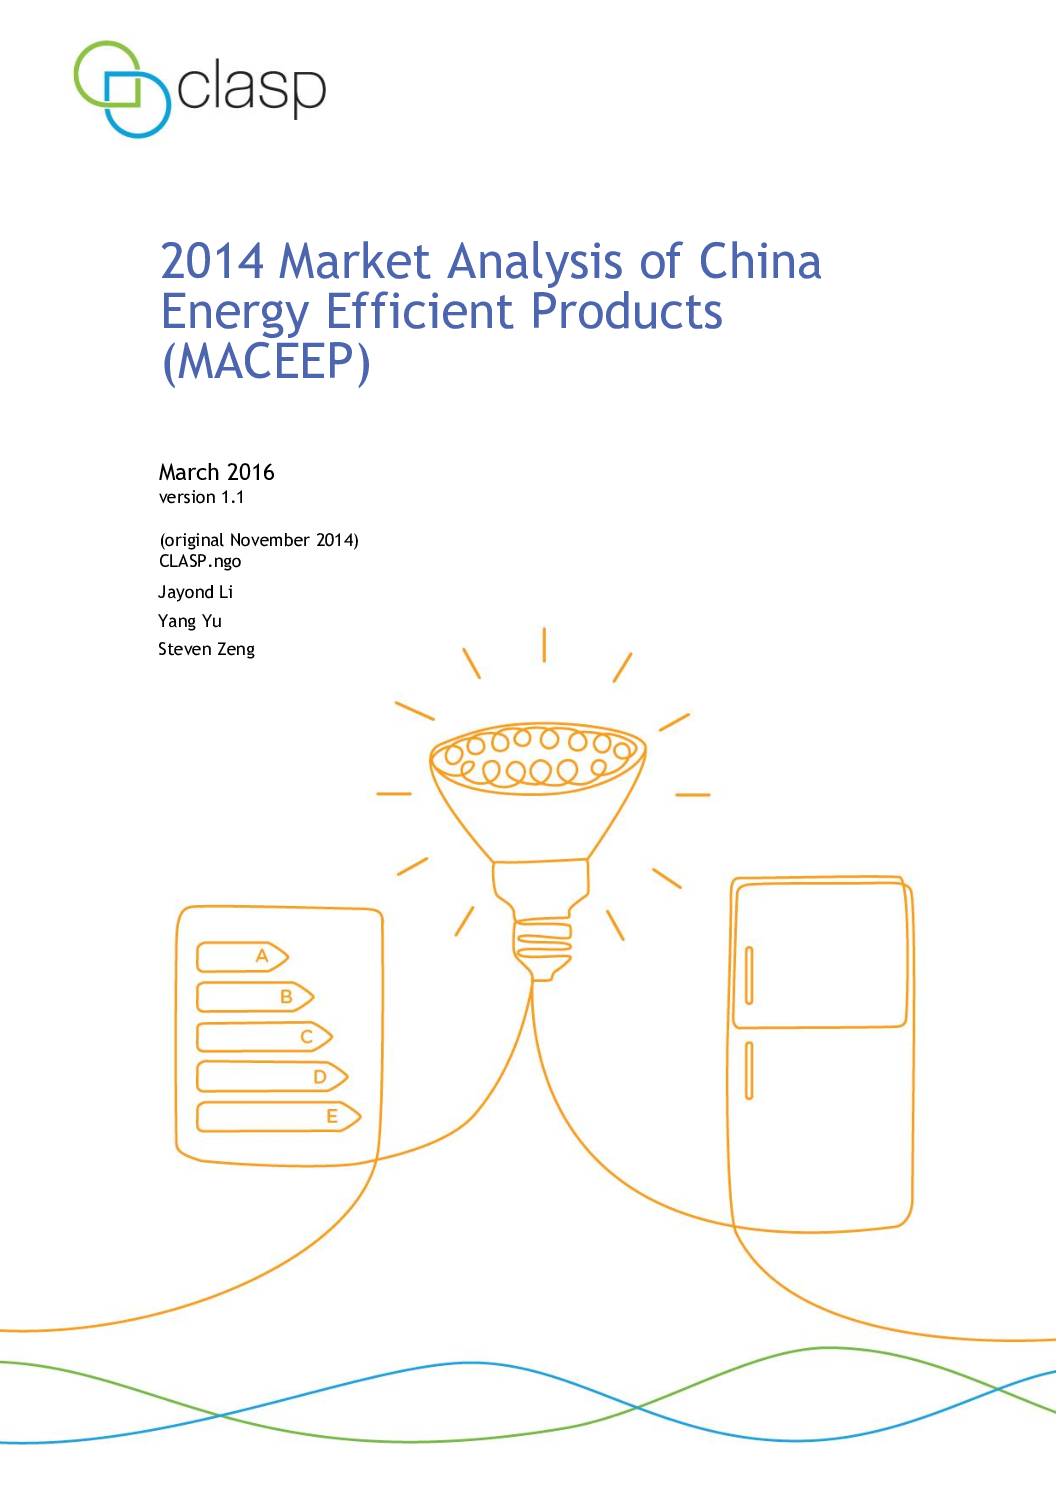 2014 Market Analysis of China Energy Efficient Products (MACEEP) (version 1.1)